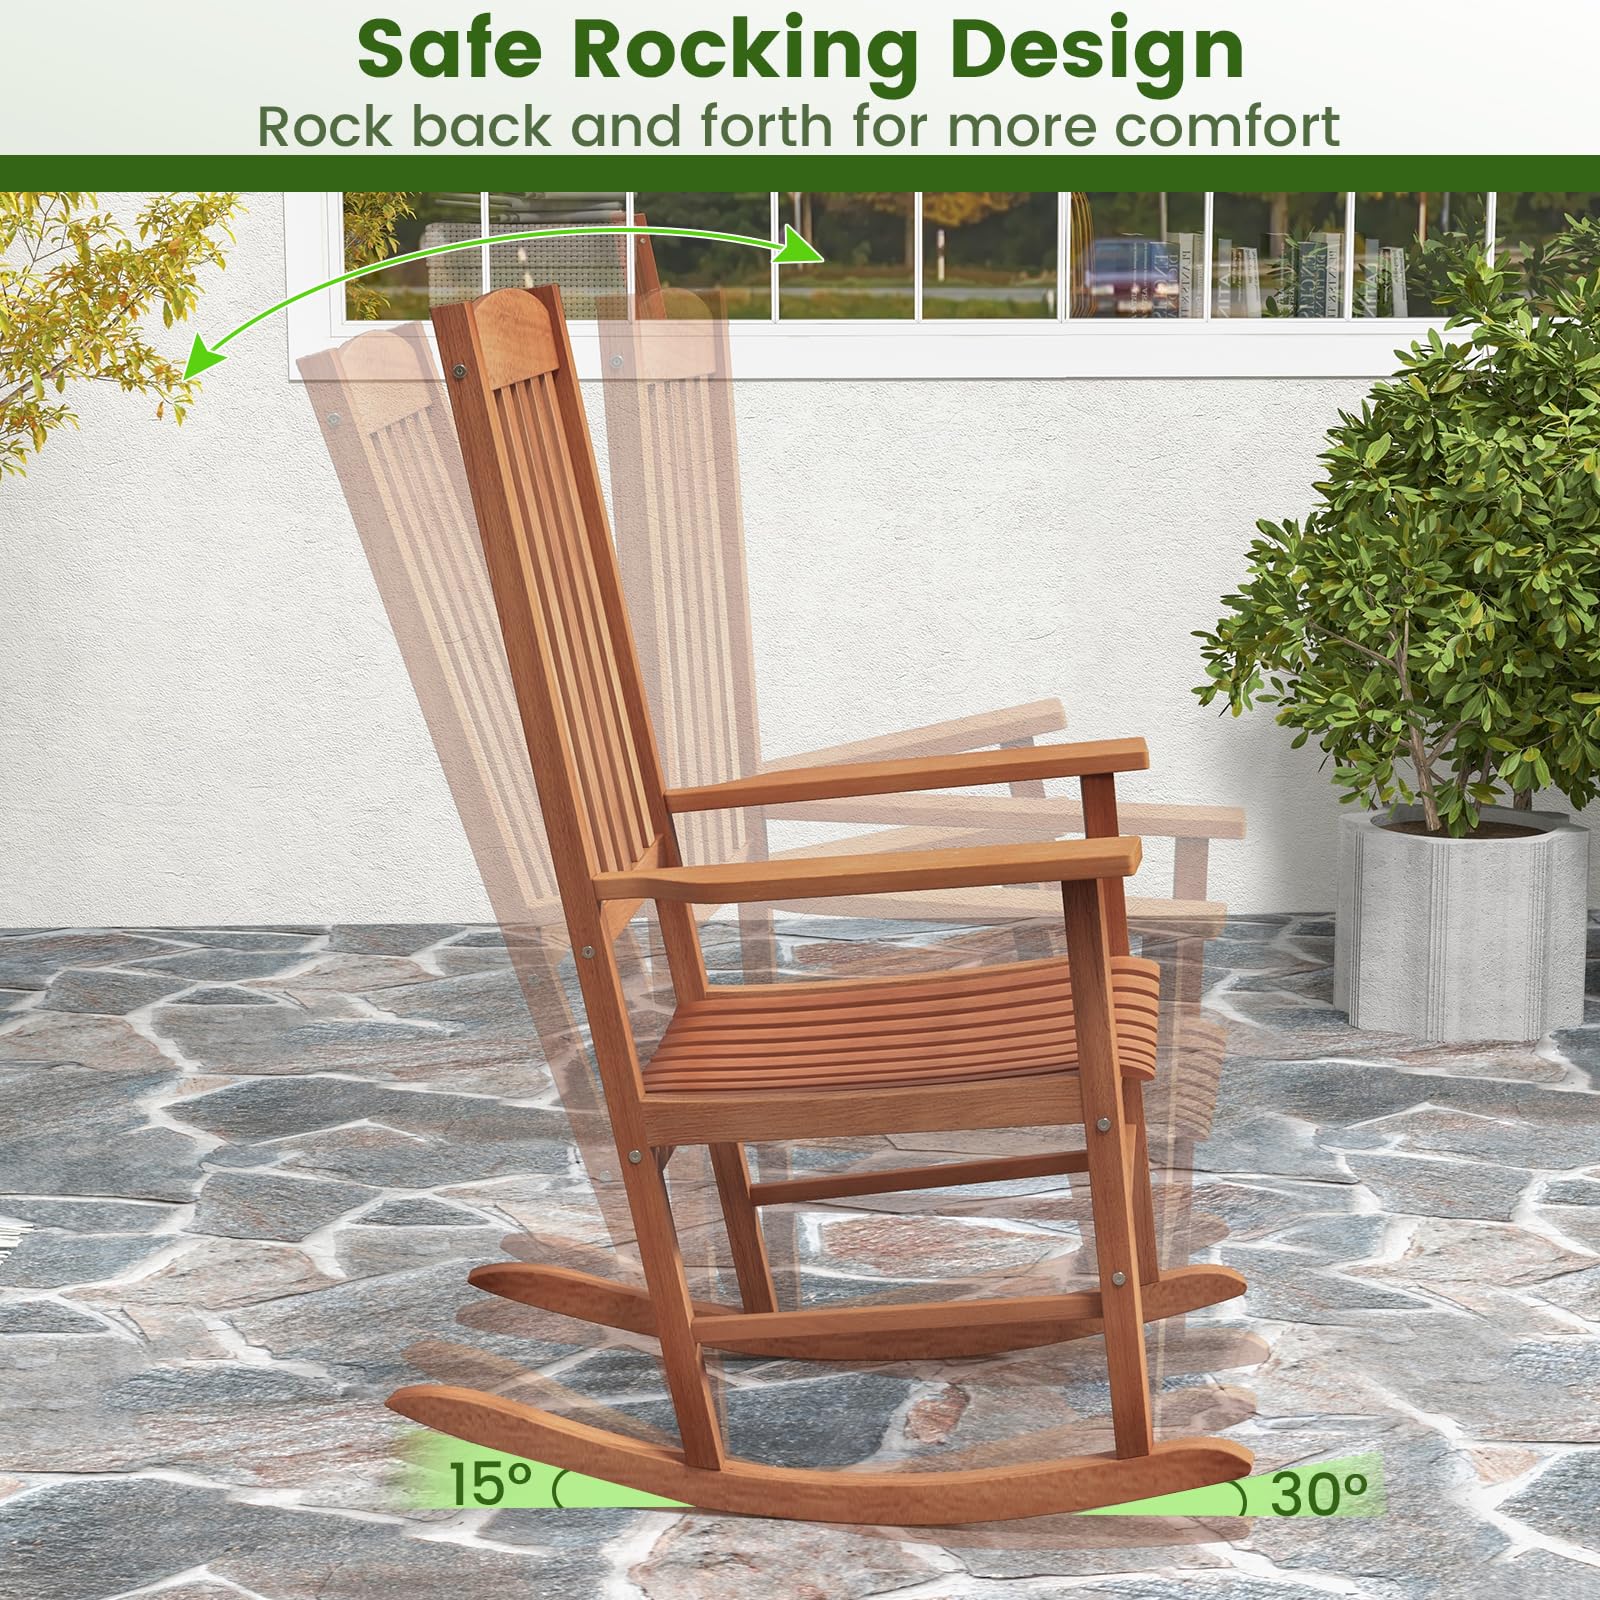 Giantex Wood Outdoor Rocking Chair - Eucalyptus Rocker Chair with Stable & Safe Rocking Base